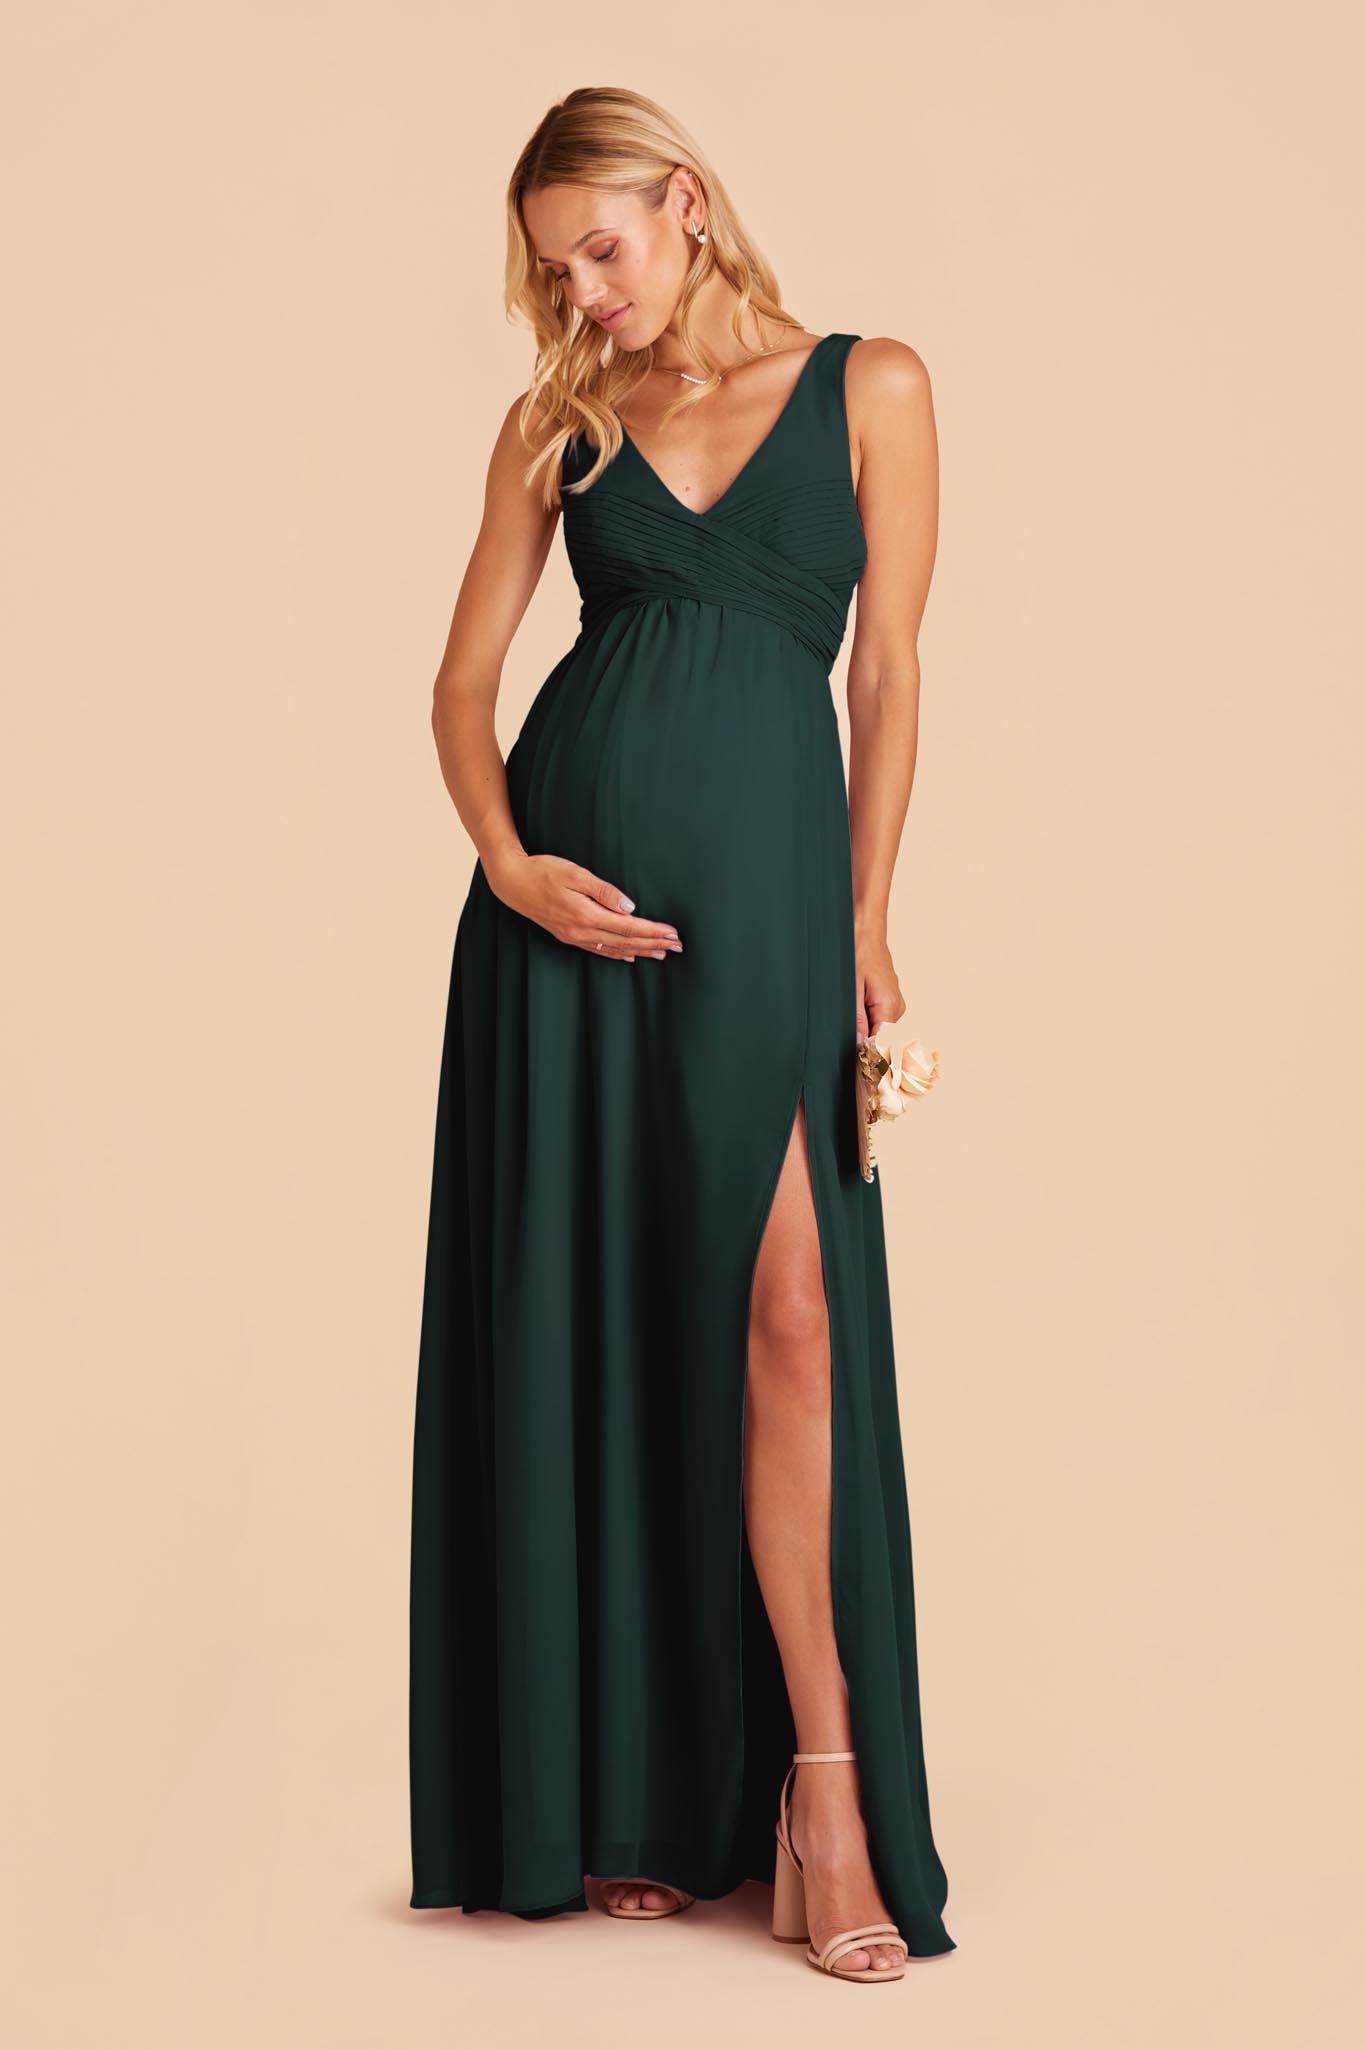 Emerald Laurie Empire Dress by Birdy Grey